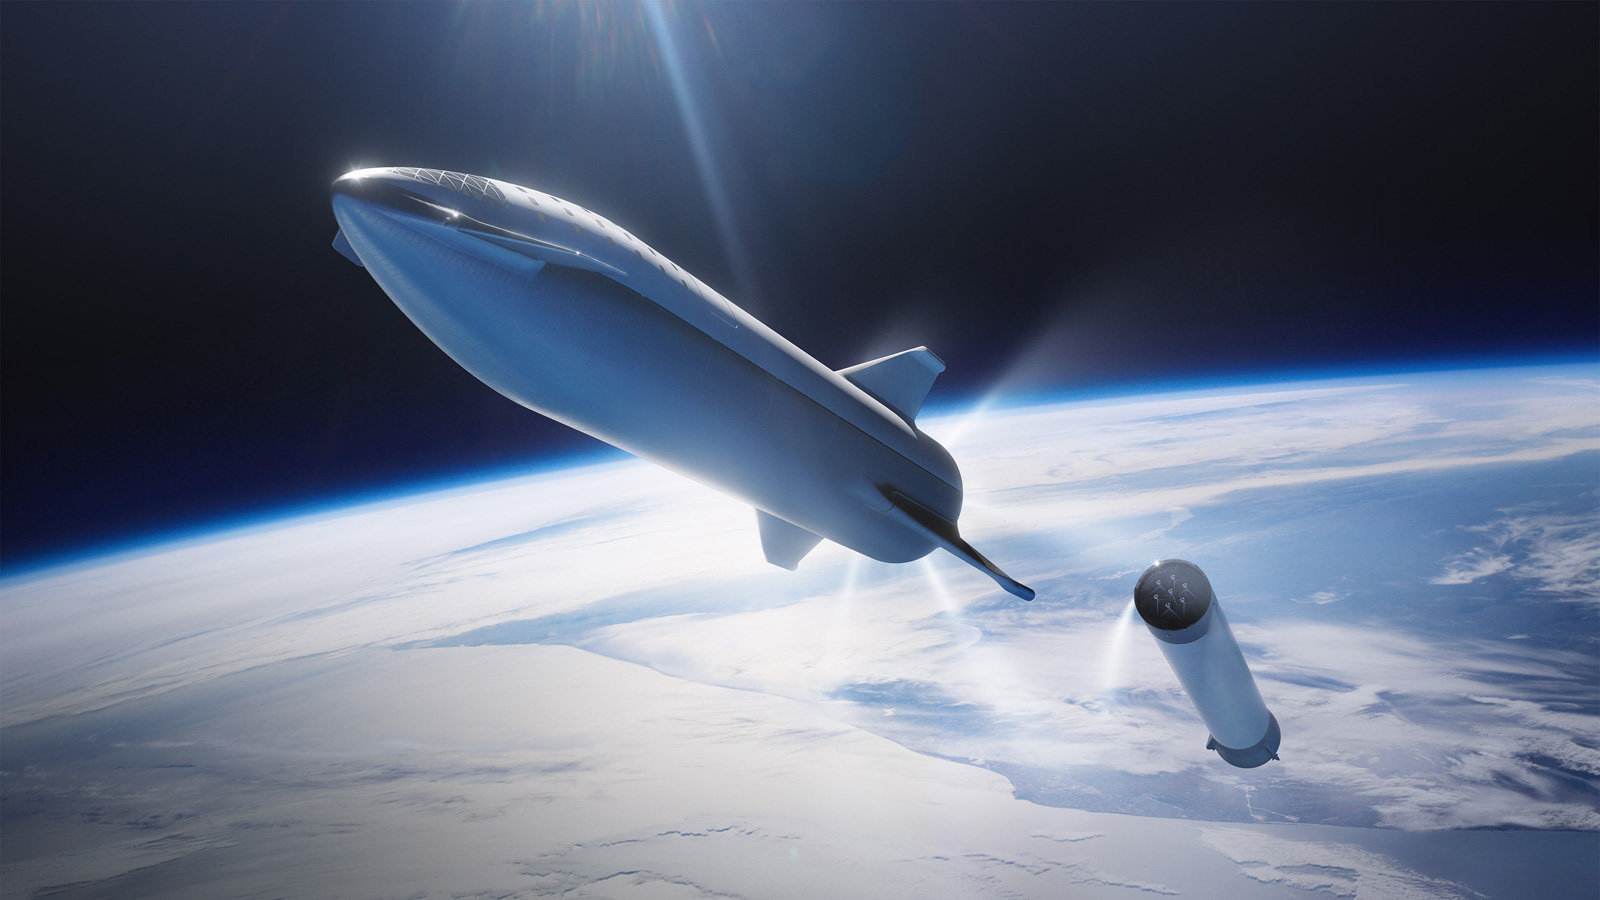 Starship, a SpaceX program rocket, might take off this spring